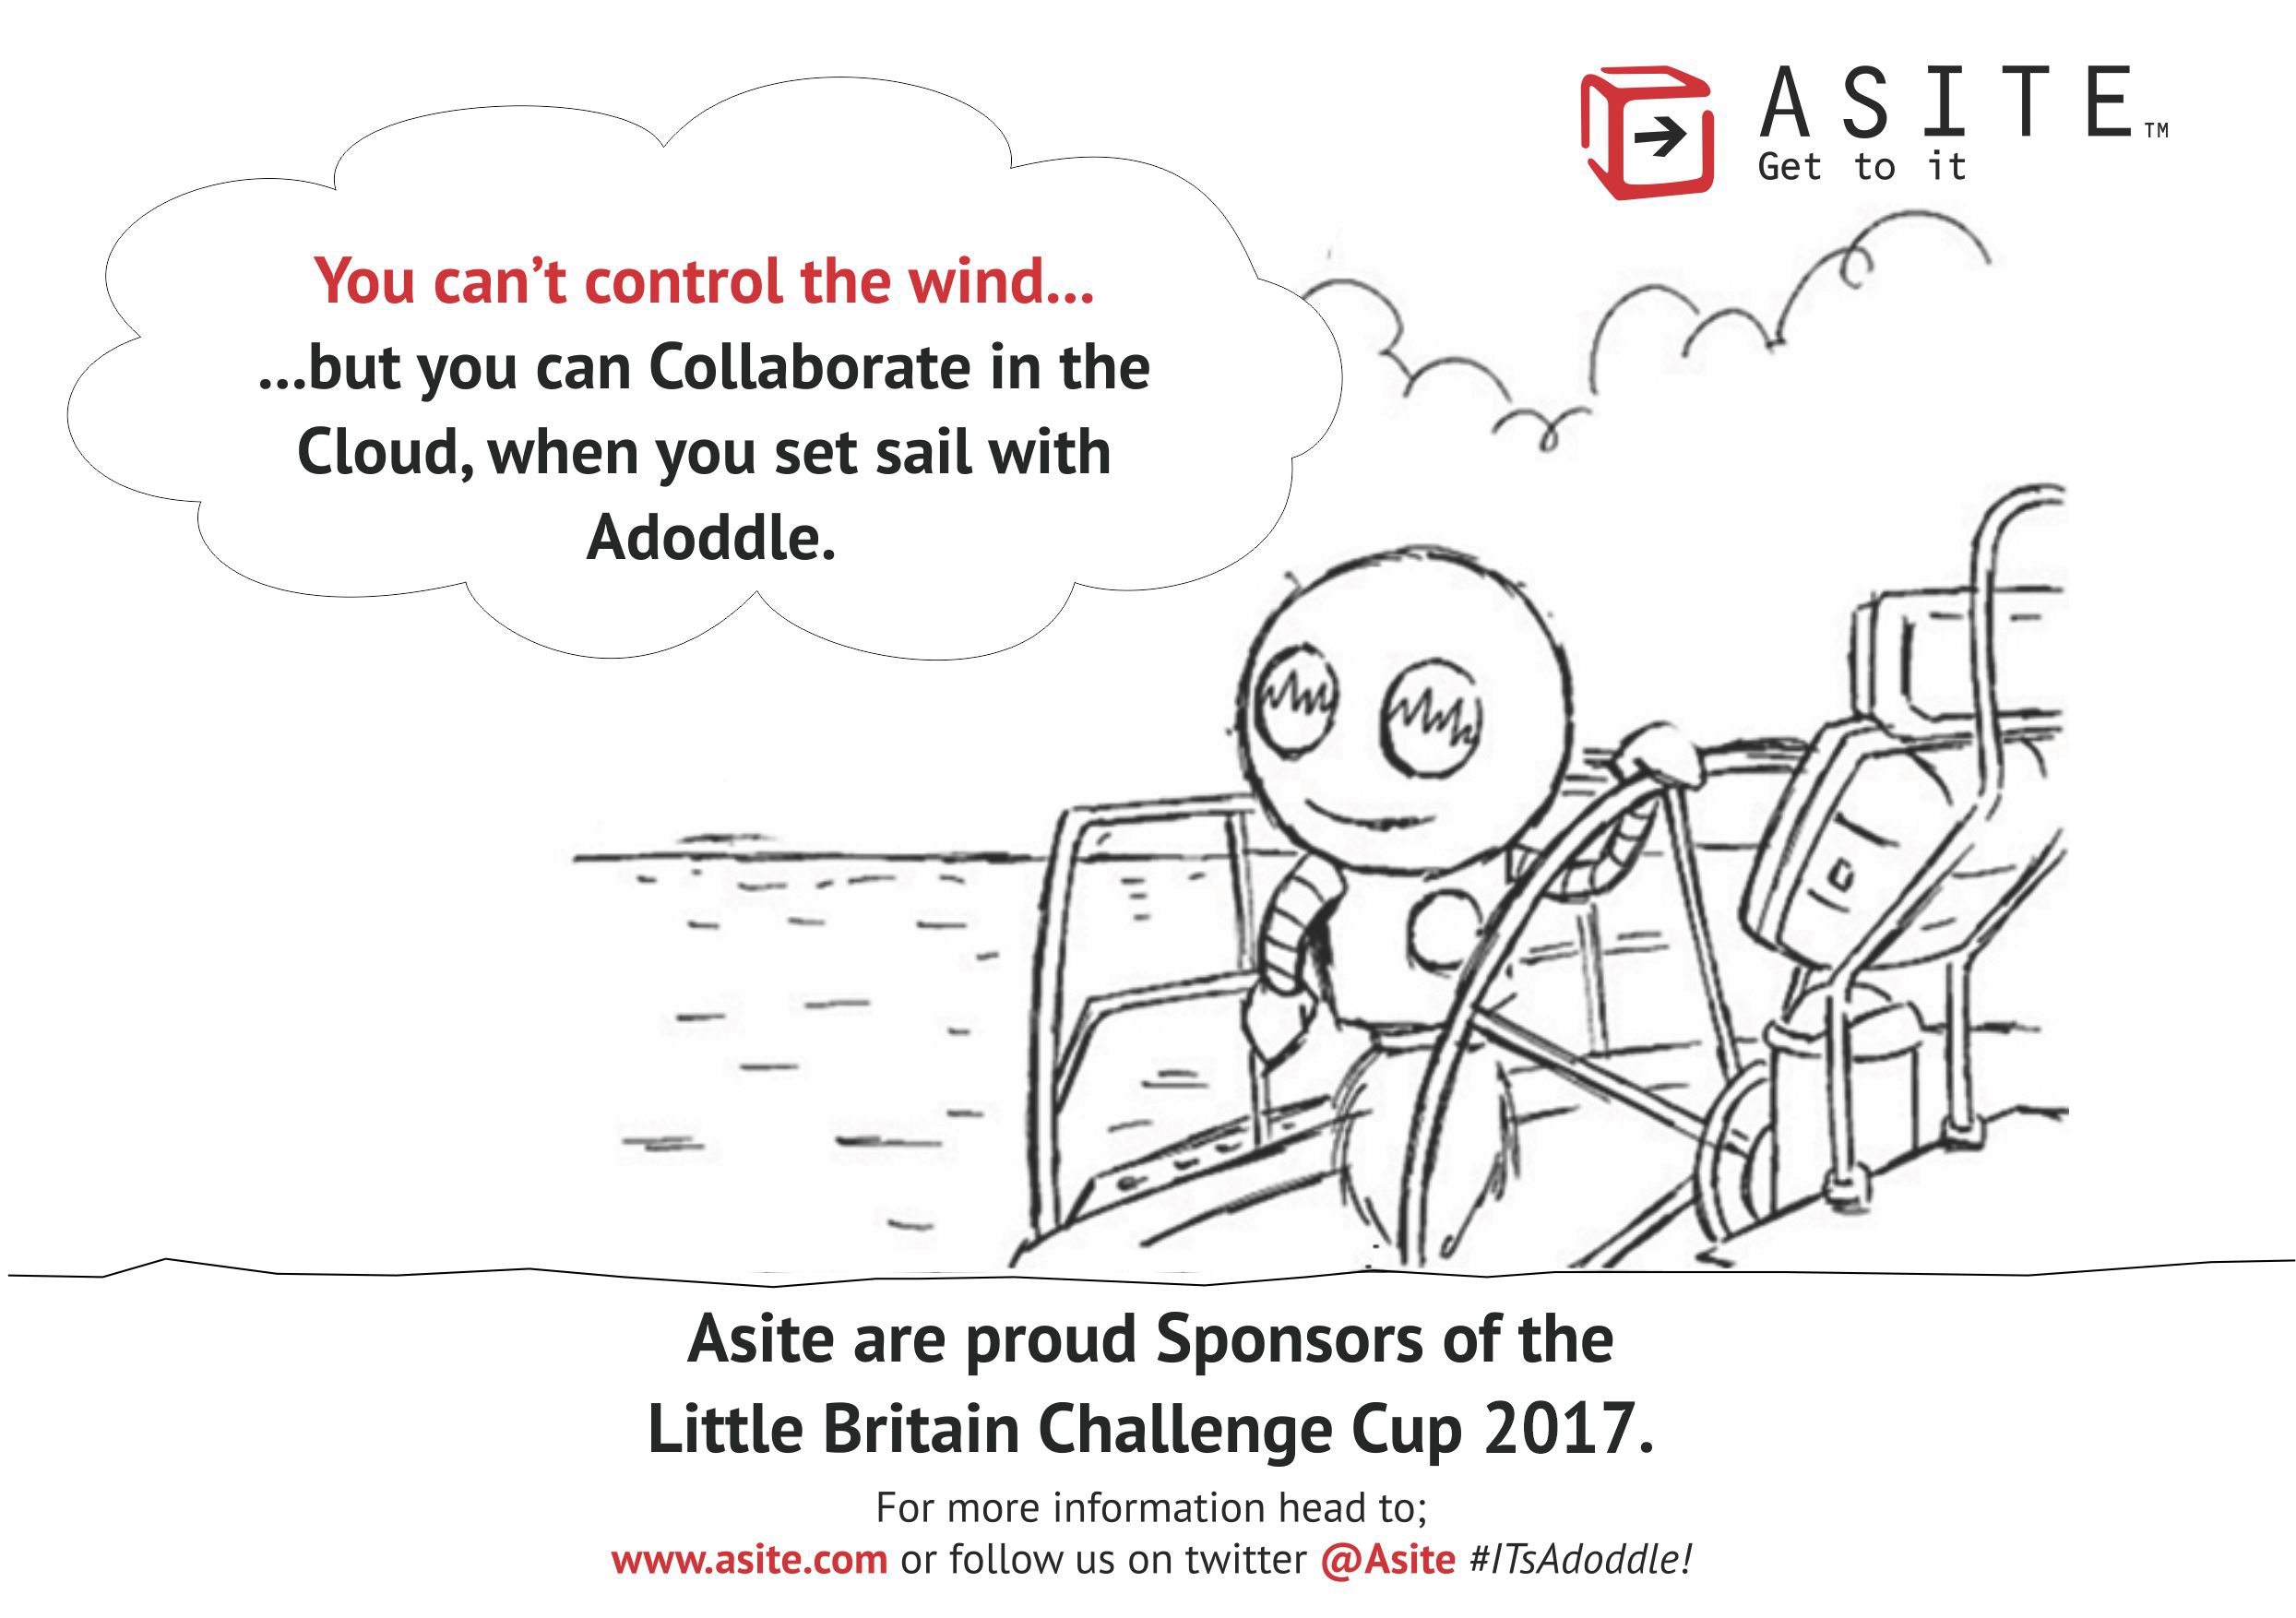 Asite are proud to be the Gold Sponsors of the 2017 Little Britain Challenge Cup for its 30th Birthday in Cowes, Isle of Wight, UK 15th - 16th September!